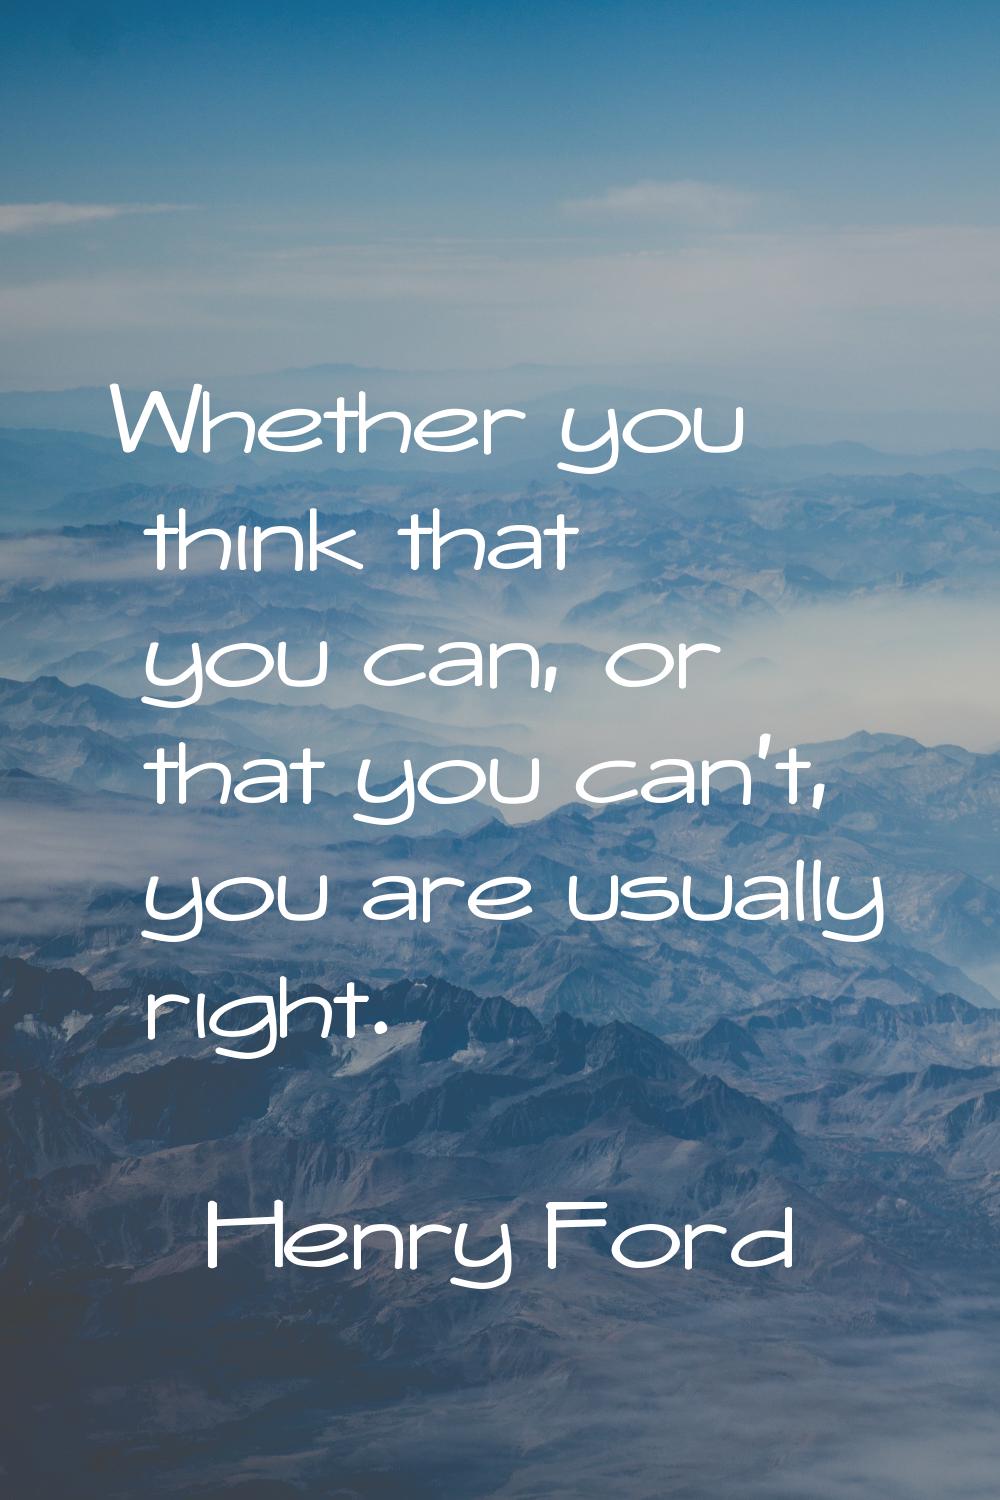 Whether you think that you can, or that you can't, you are usually right.